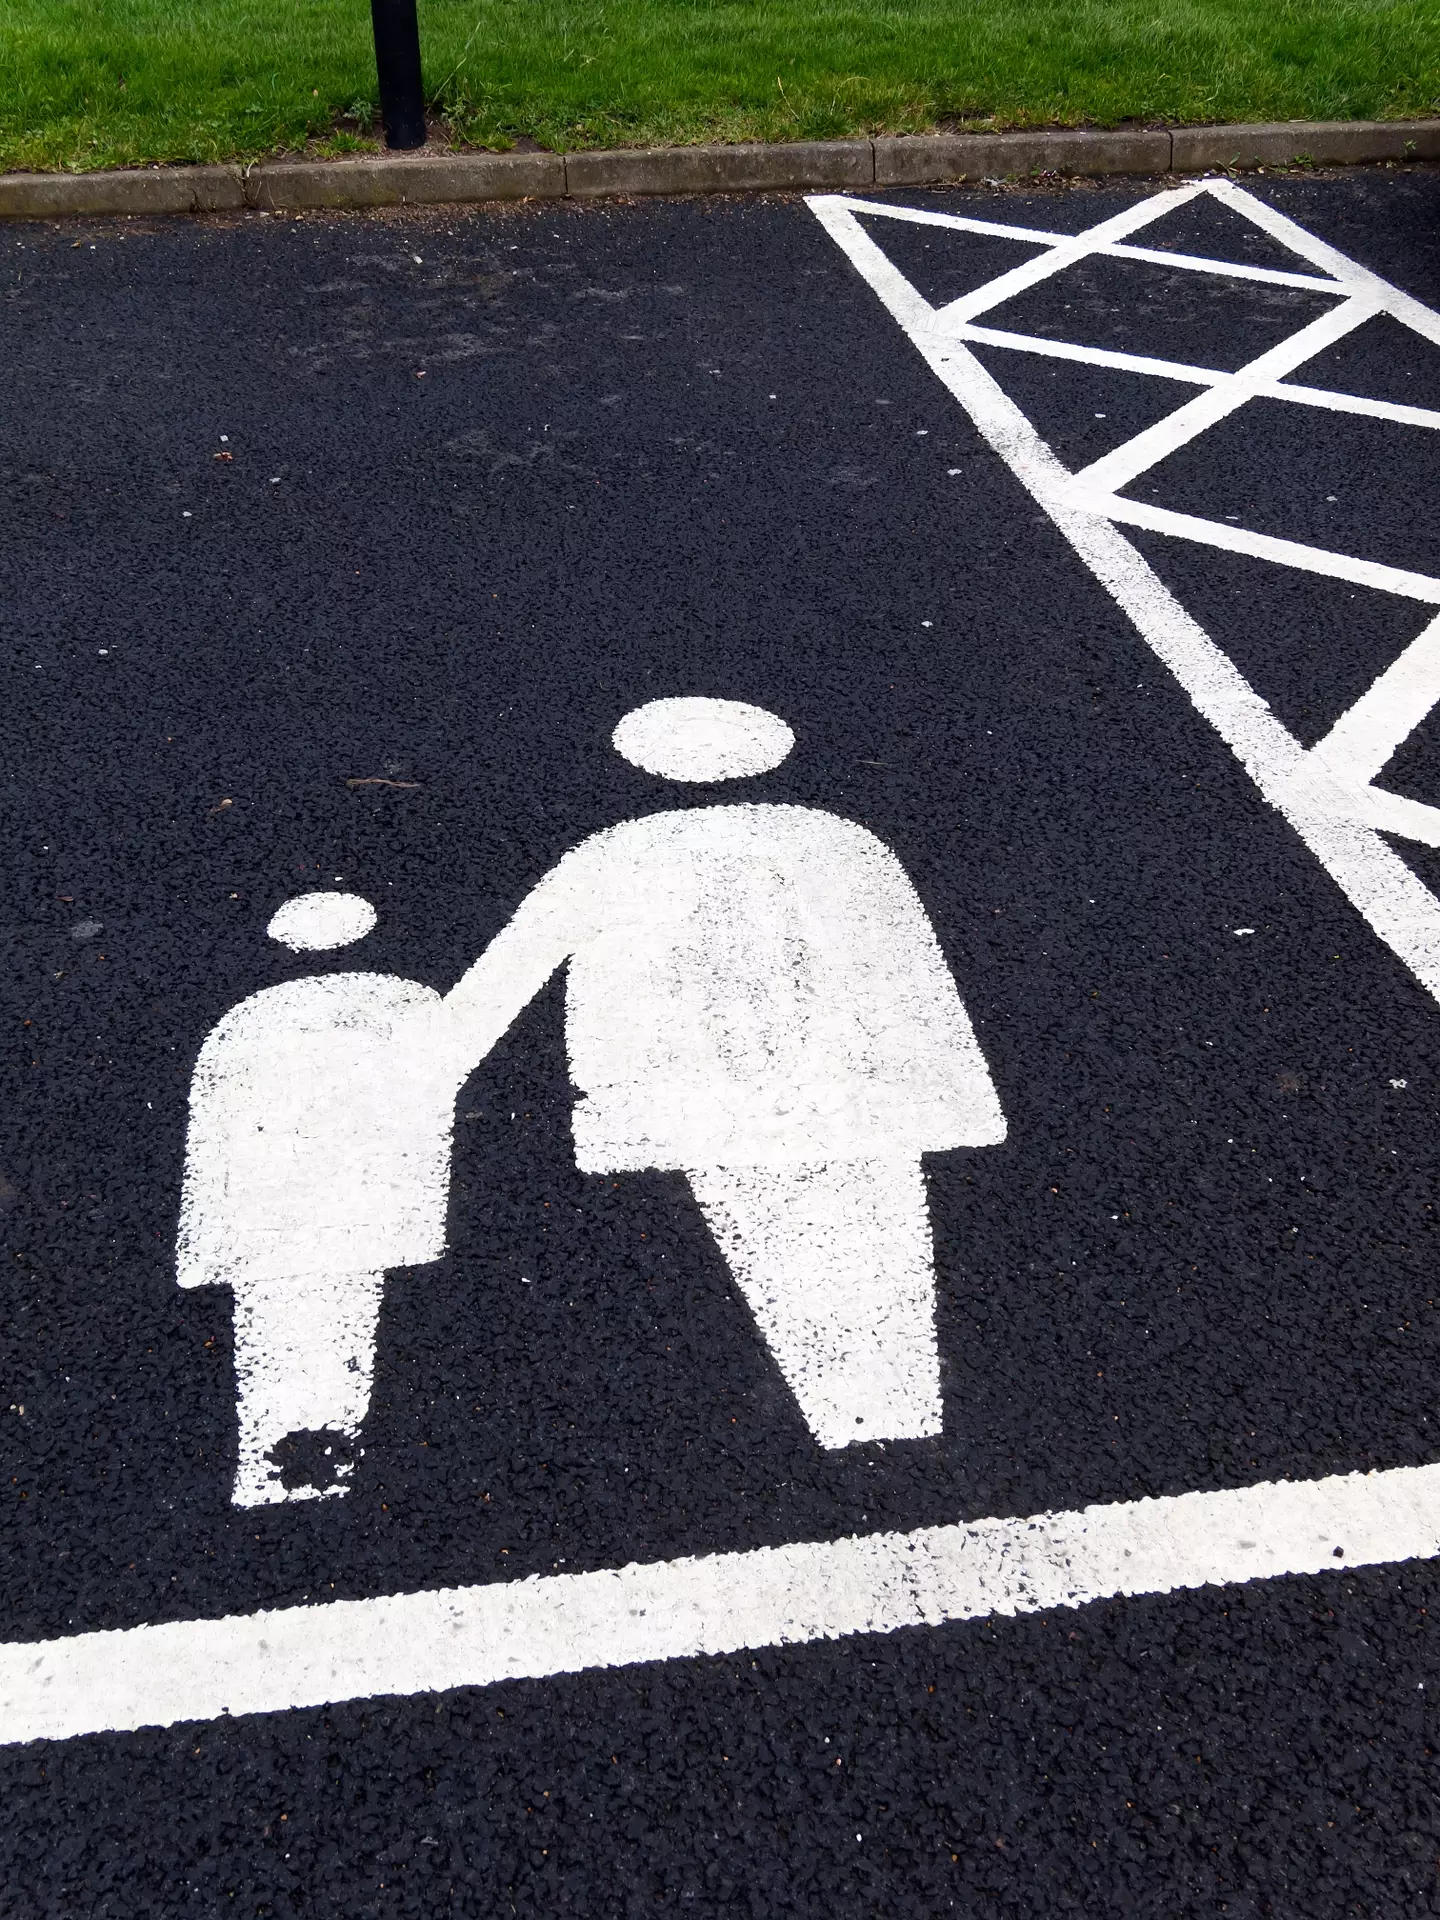 The are specific rules for parent and child parking spaces.